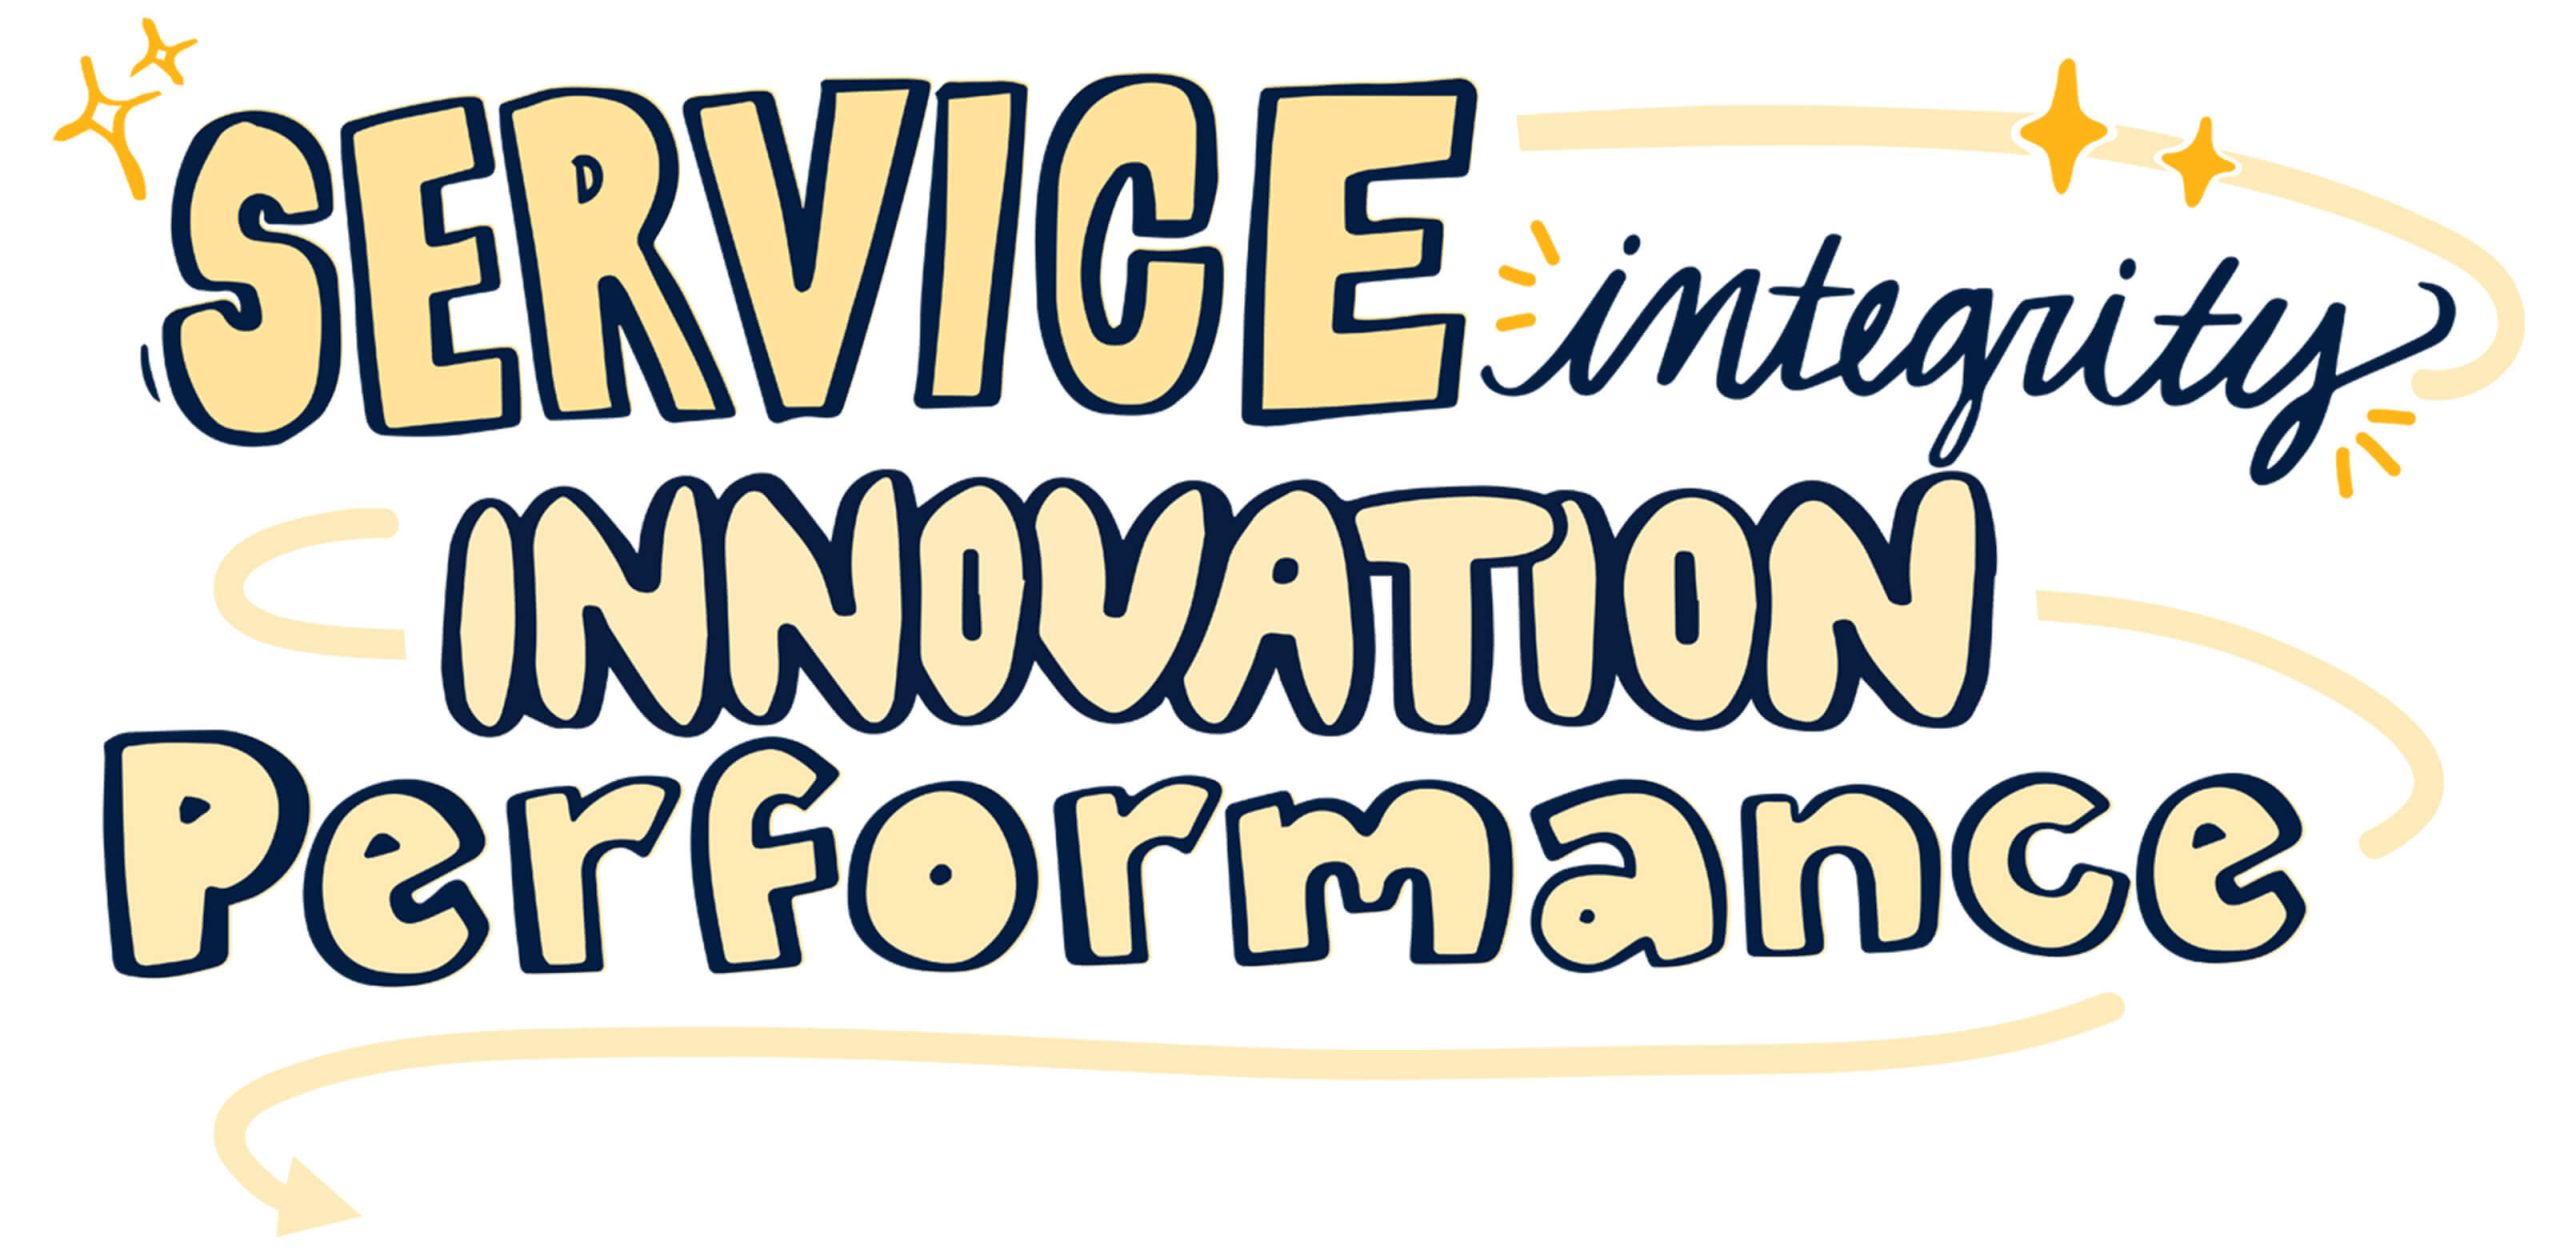 Service, Integrity, Innovation and Performance